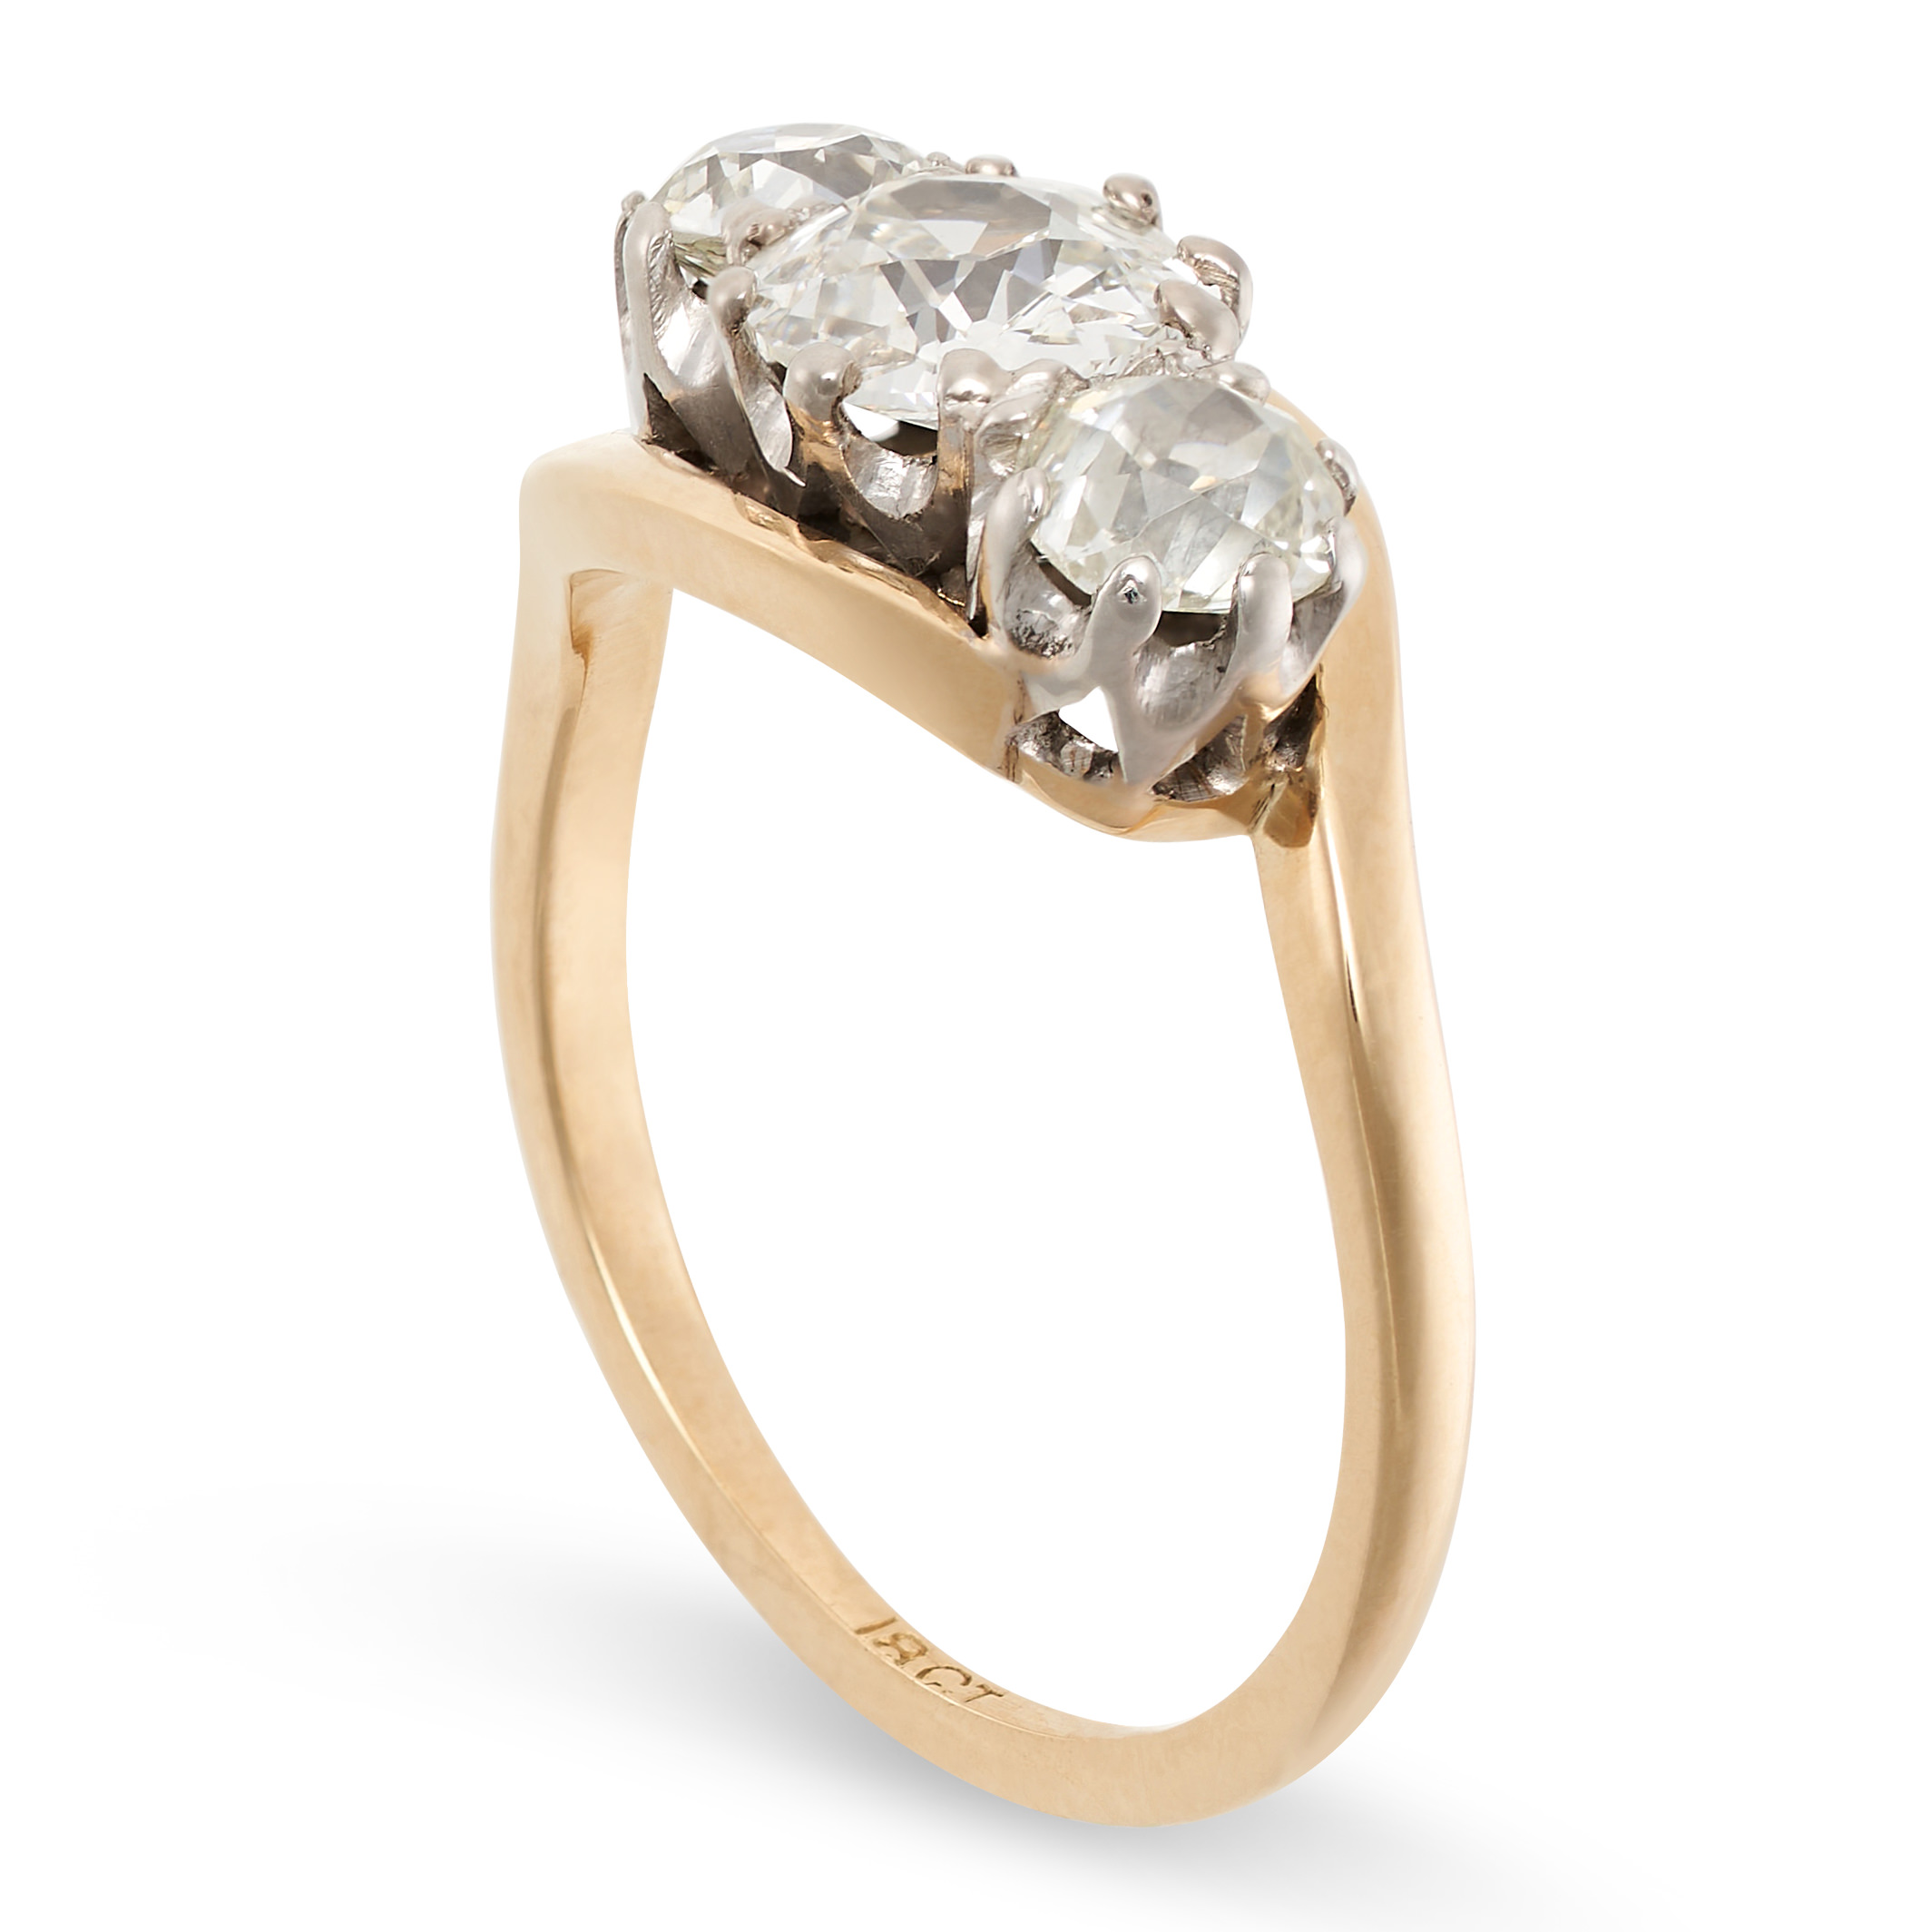 AN DIAMOND THREE STONE RING in 18ct yellow gold, set with three old mine cut diamonds all - Image 2 of 2